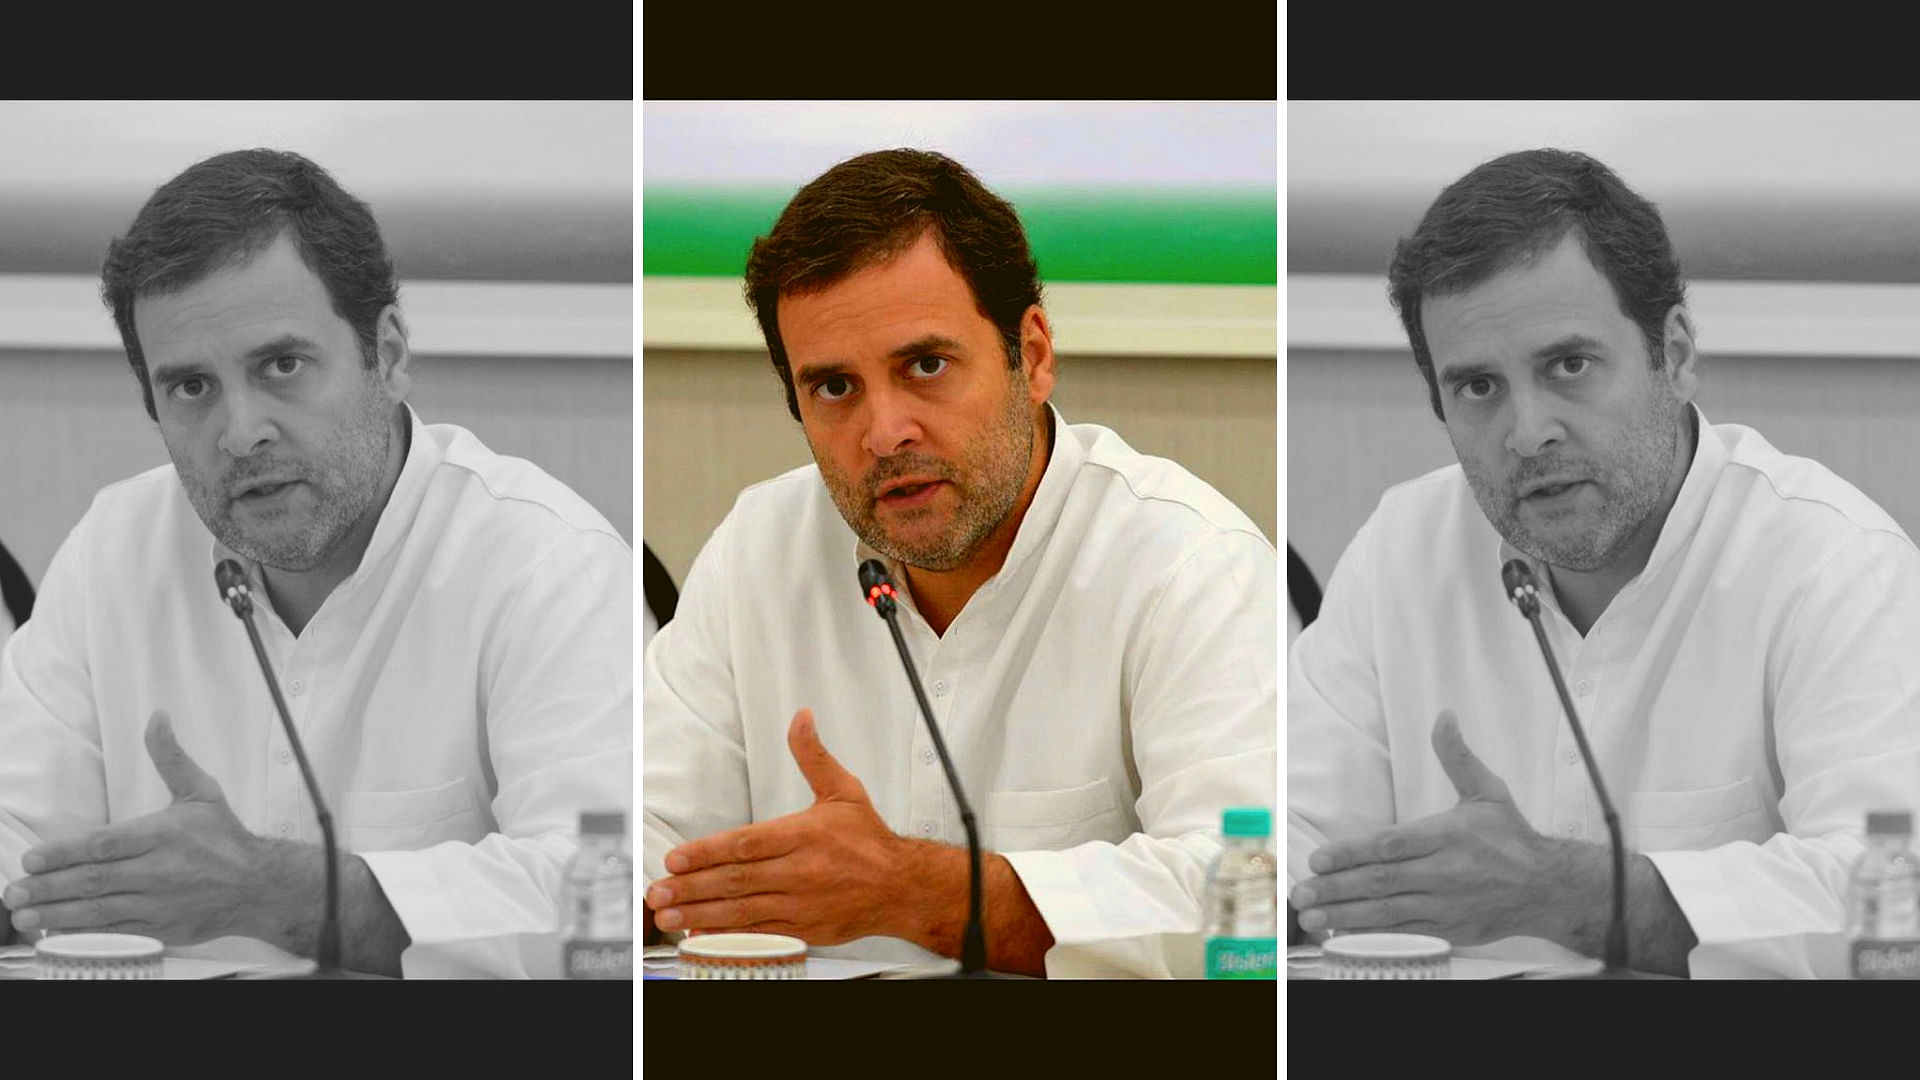 Congress President Rahul Gandhi finds himself contesting against two other namesakes from the Wayanad constituency in 2019 polls.